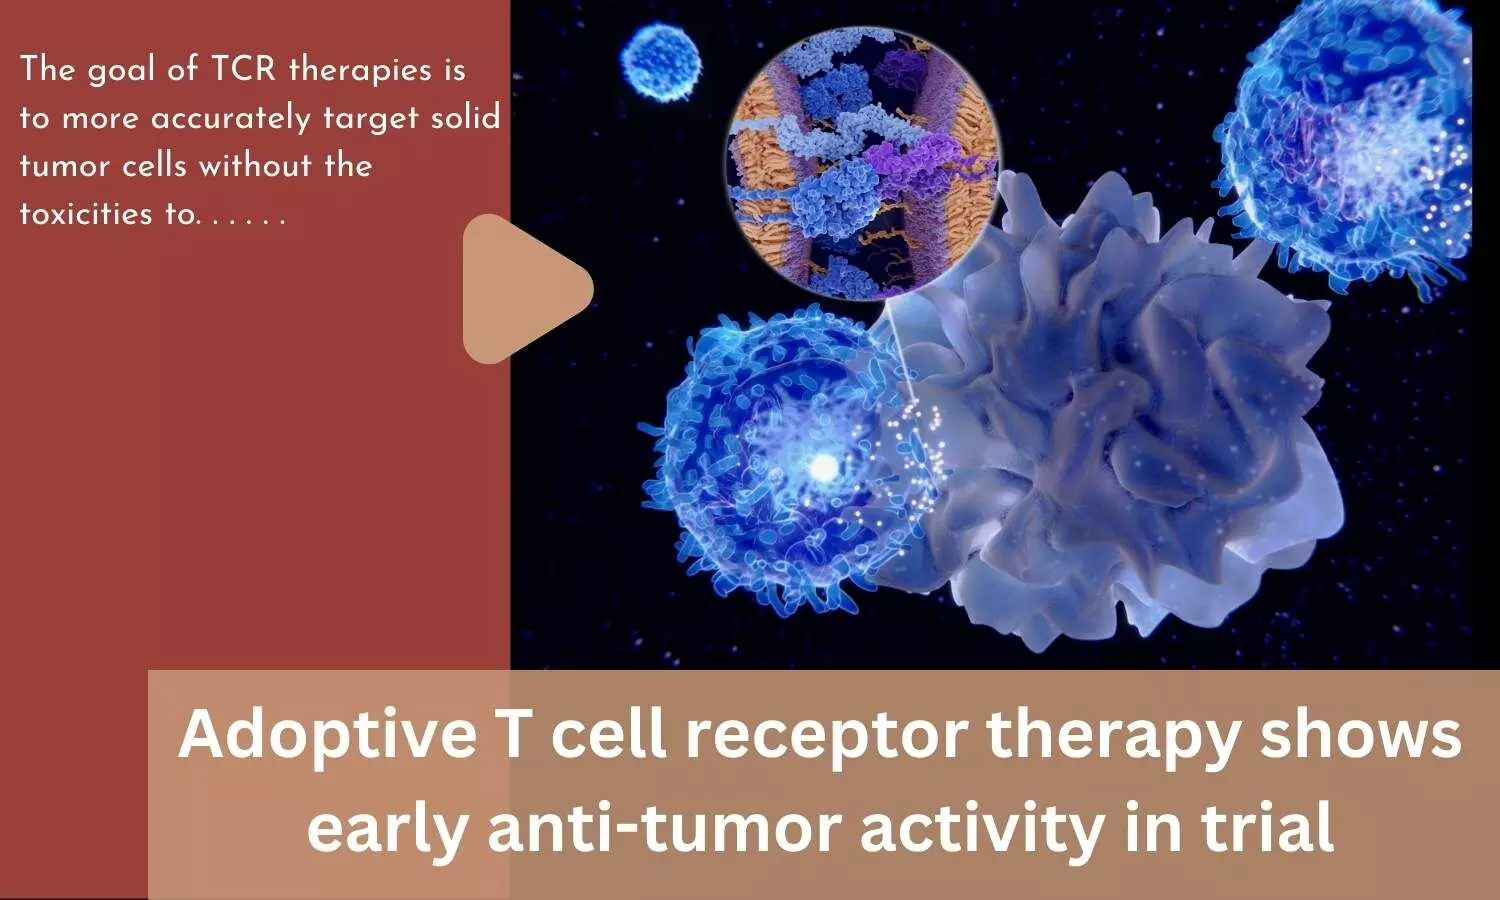 Adoptive T cell receptor therapy shows early anti-tumor activity in trial